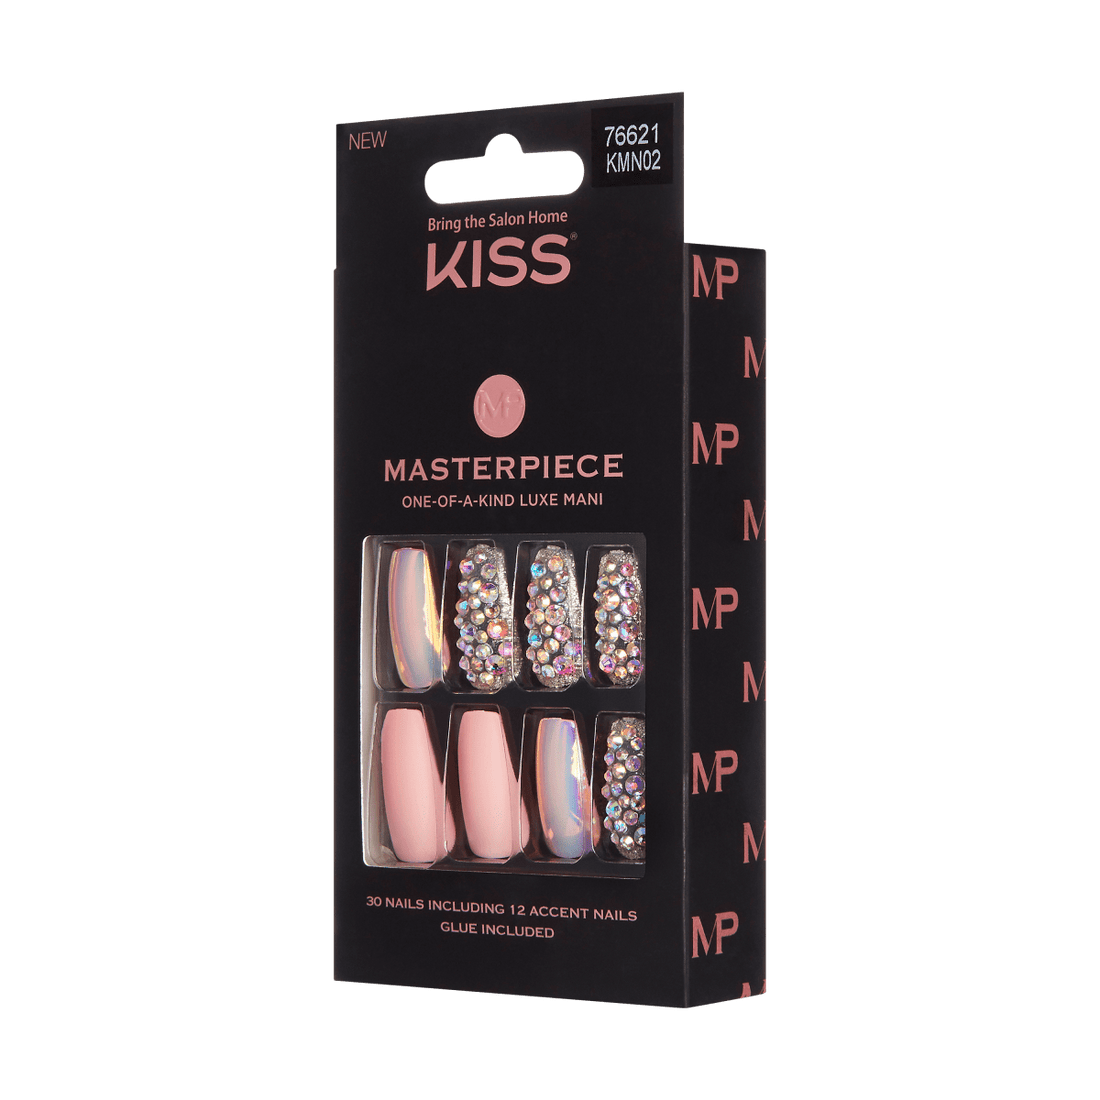 KISS Masterpiece, Press-On Nails, Every time I Slay, Pink, Long Coffin, 30ct